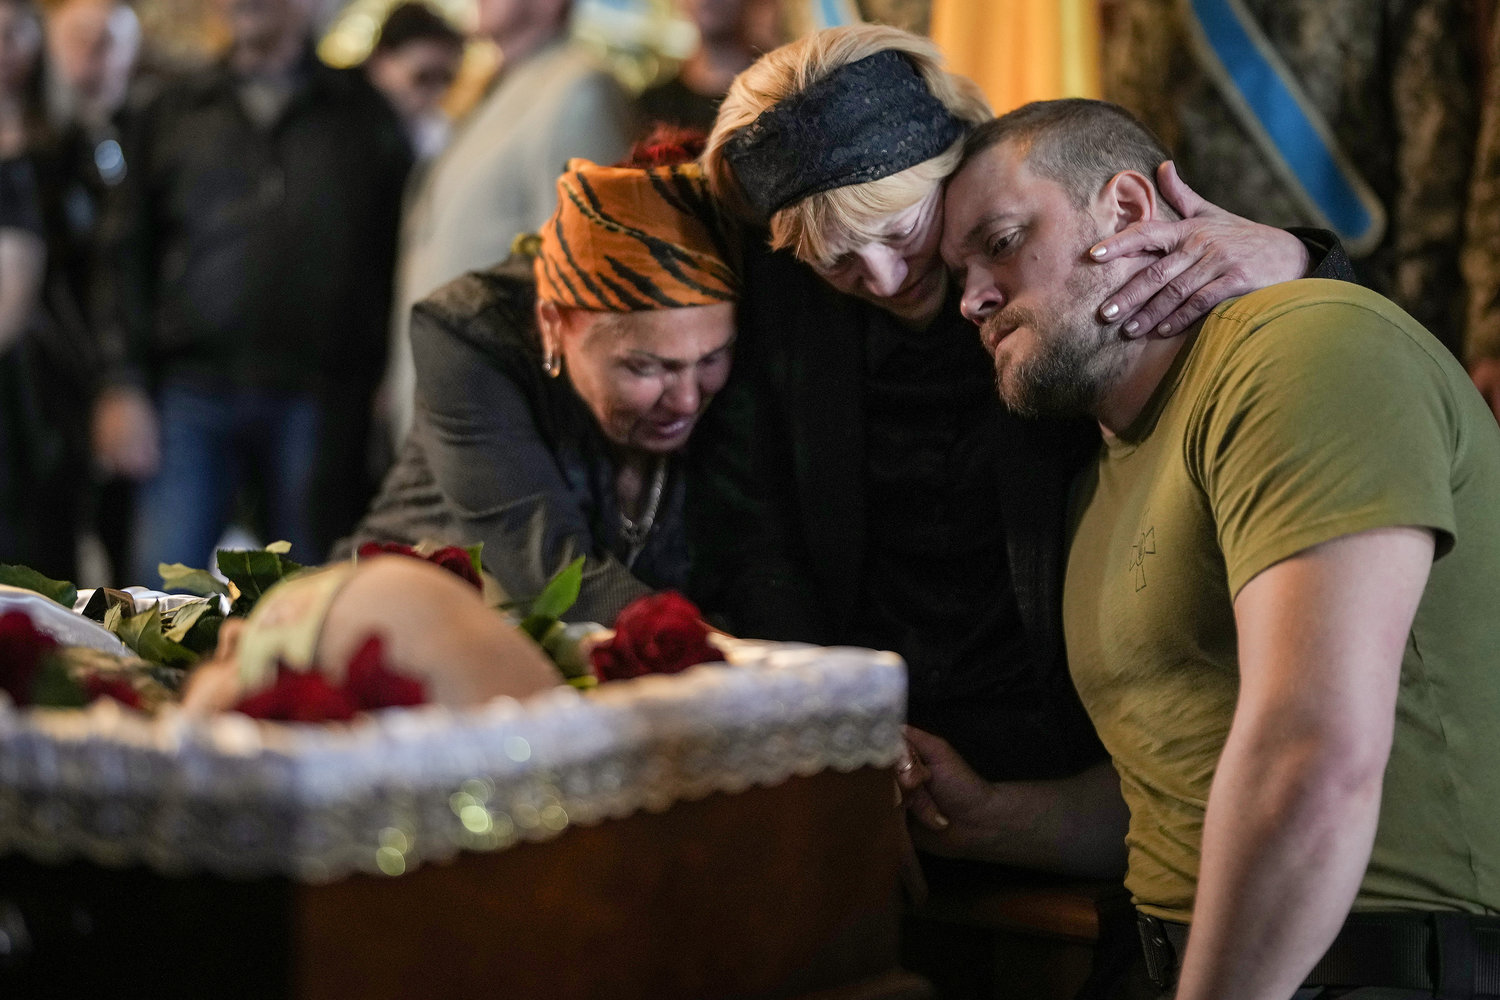 Relatives, friends and comrades of Ukrainian soldier Eduardo Trepilchenko, who was killed on the Eastern front battling the Russian invasion , attend his funeral at St Michael's Cathedral on May 25, 2022 in Kyiv, Ukraine. (Christopher Furlong/Getty Images/TNS)